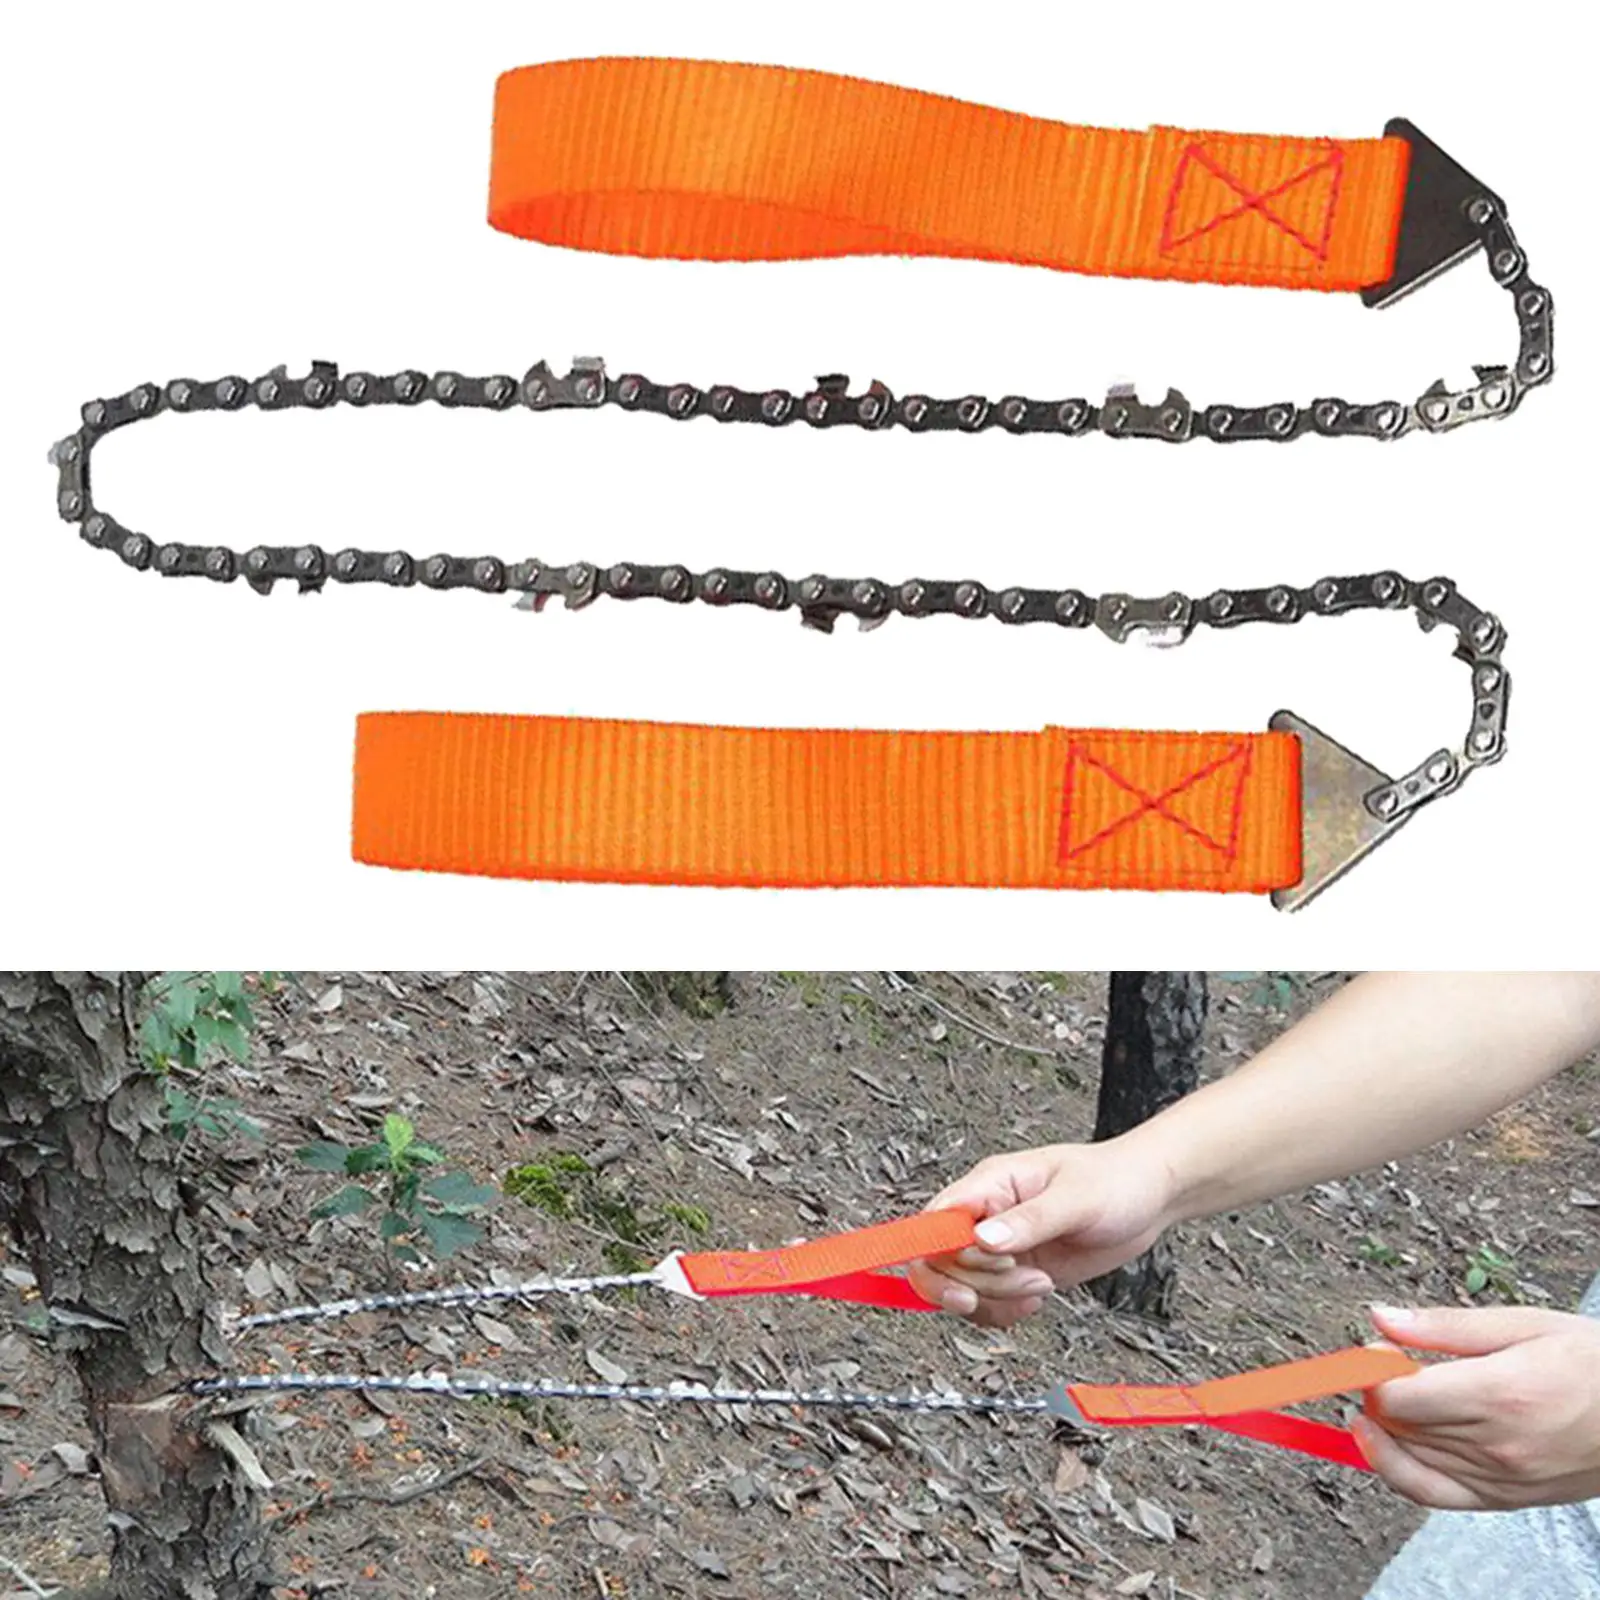 Survival Chainsaws Hand Cutting Tools for Outdoor Emergency Saws Scouts